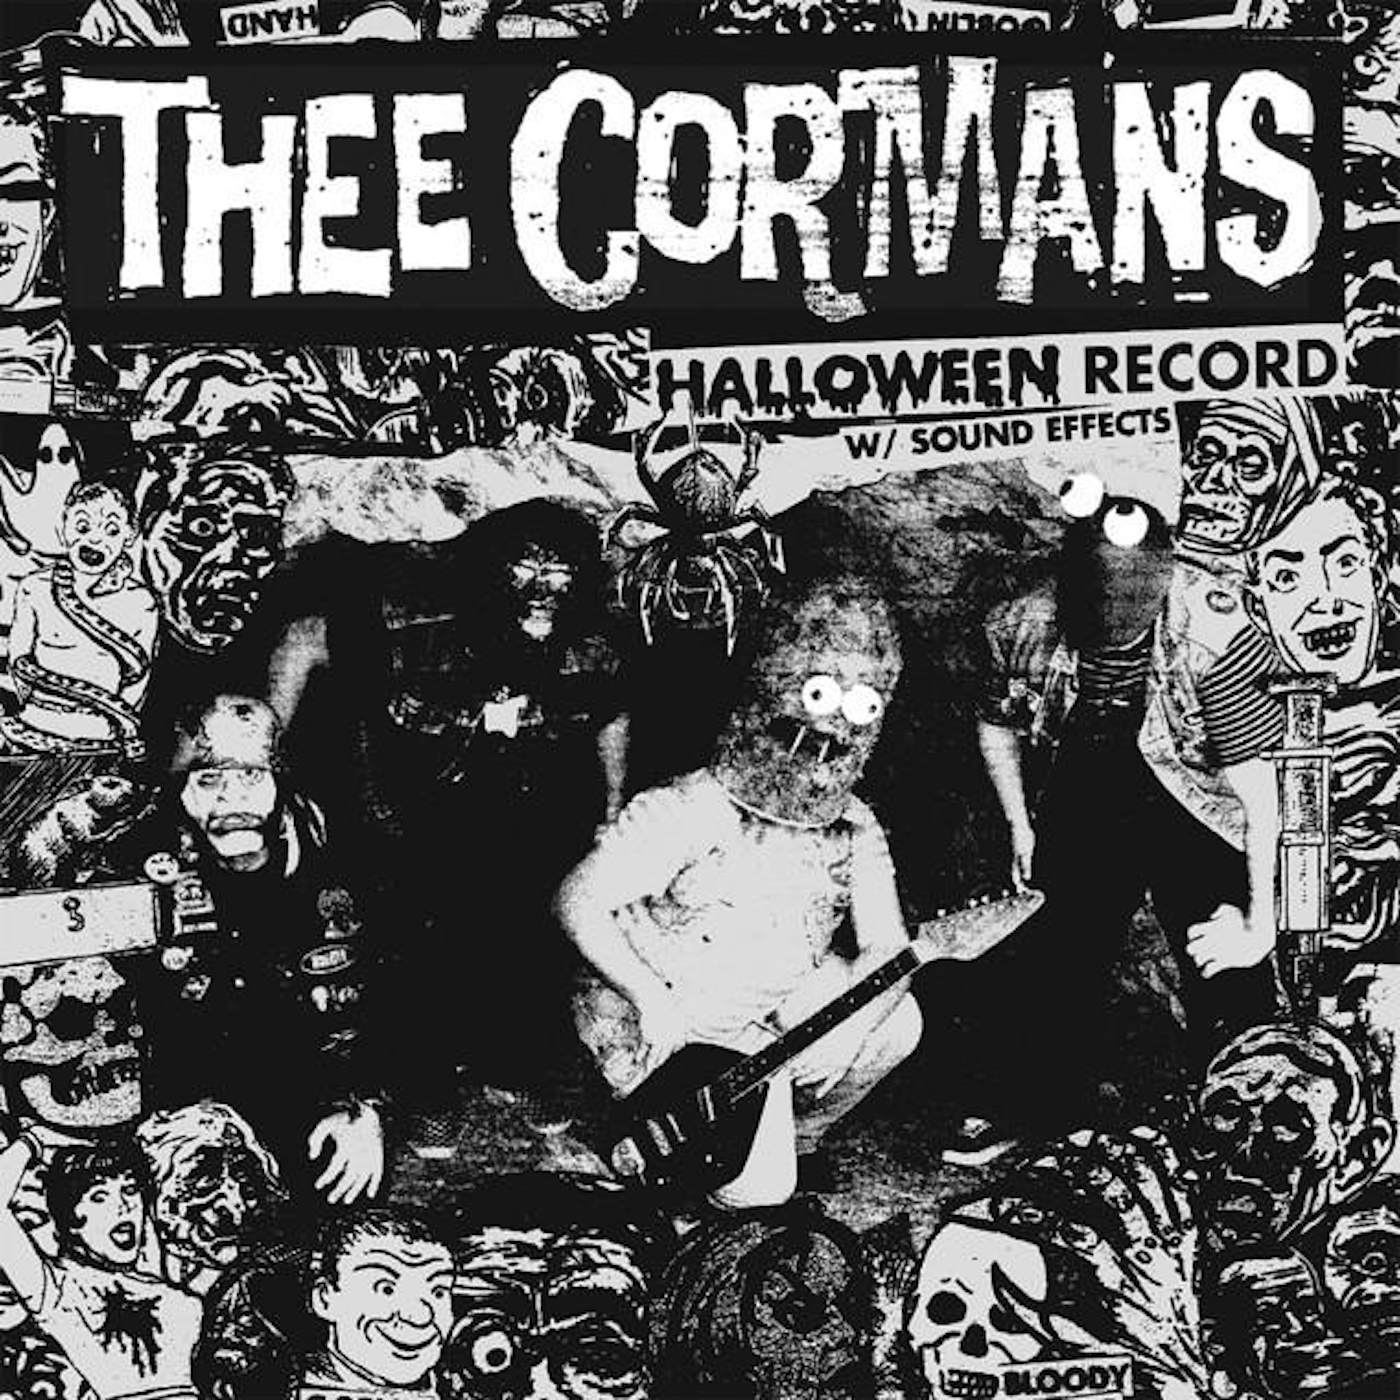 Thee Cormans